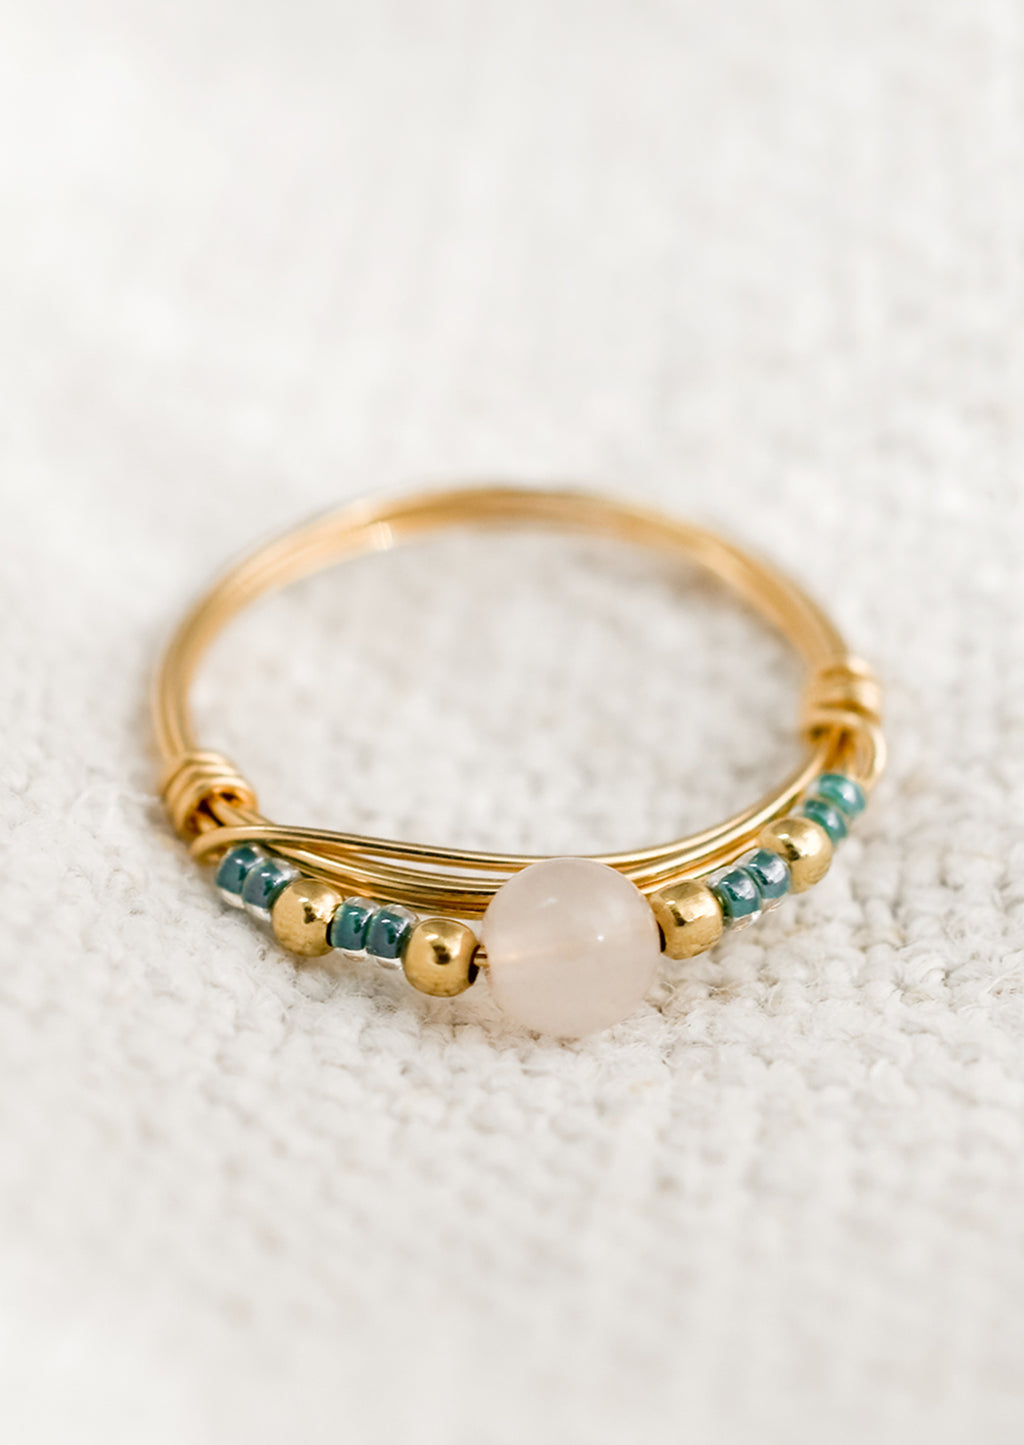 1: A gold wire ring with blue and pink beads.